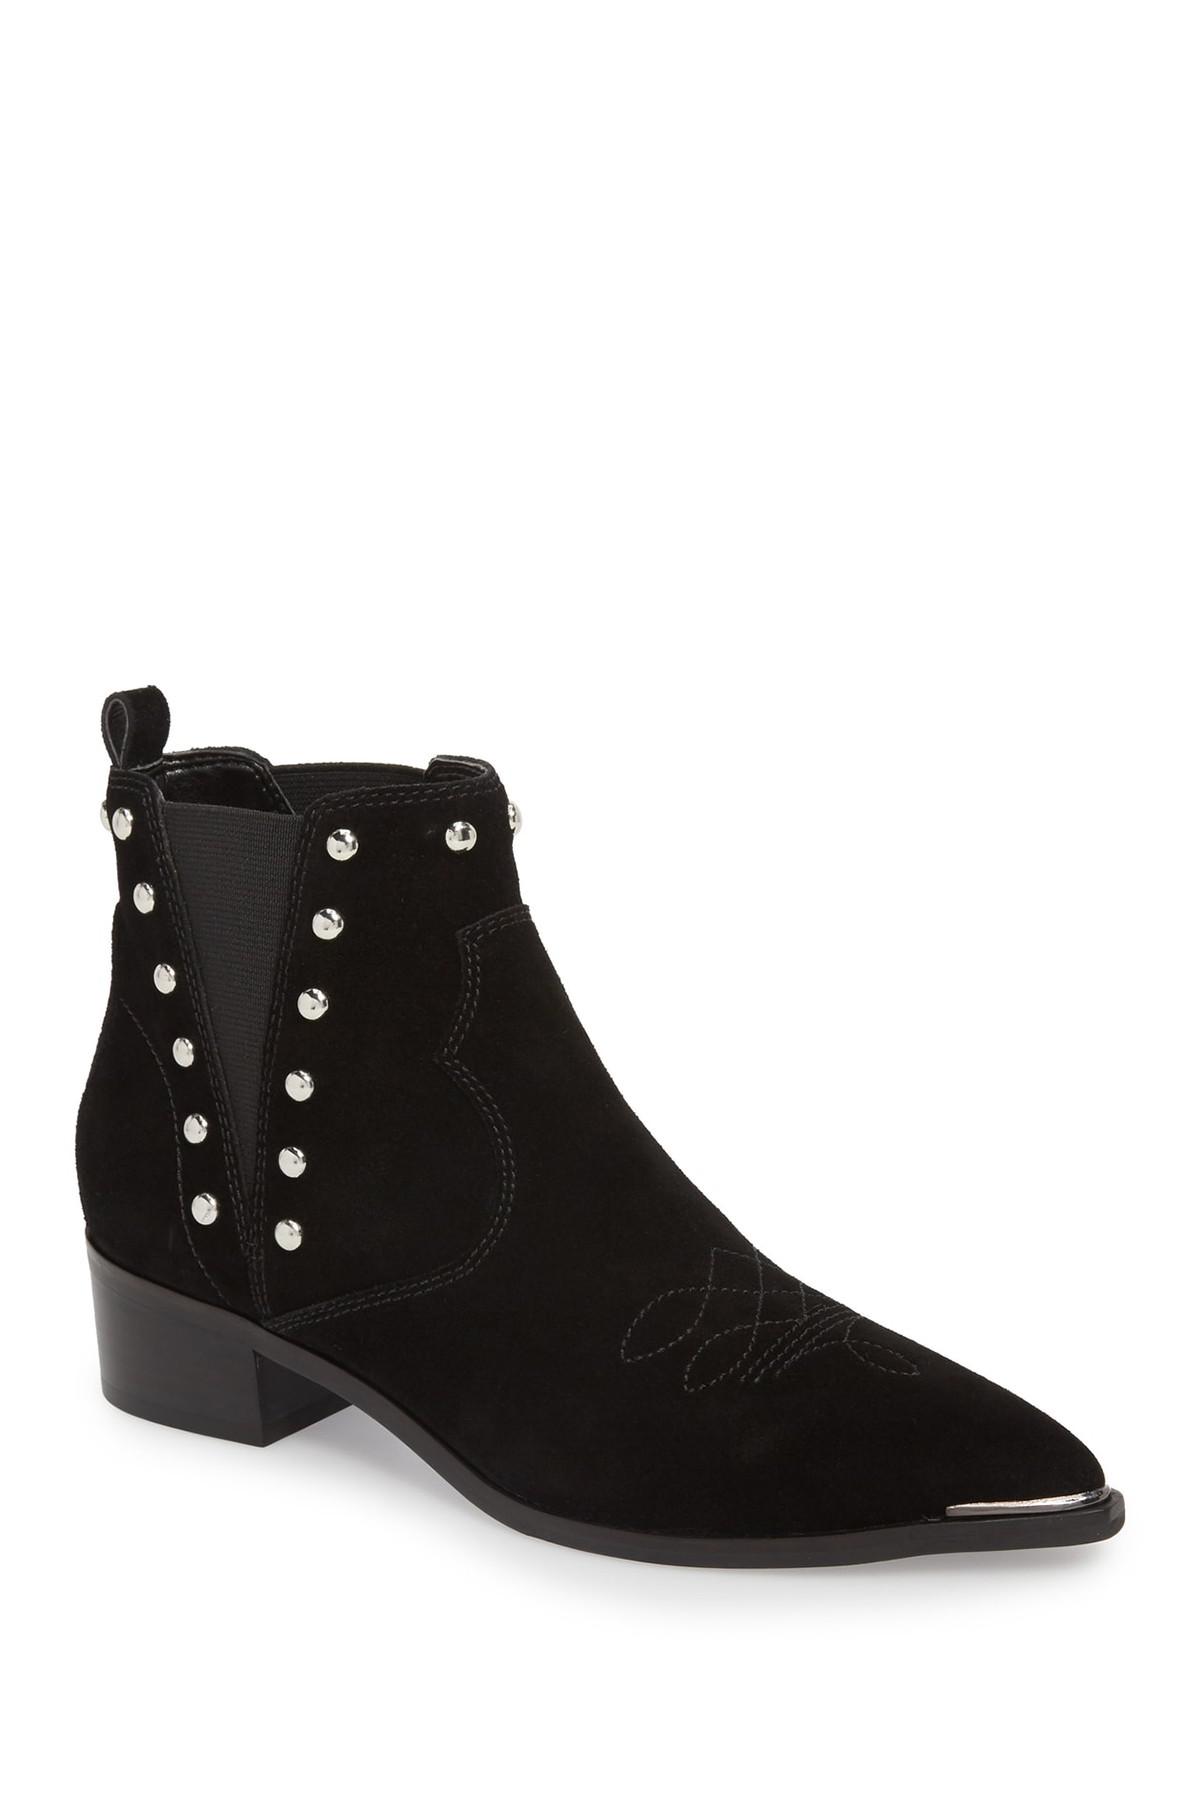 Marc Fisher Yente Chelsea Boot in Black Suede (Black) Lyst